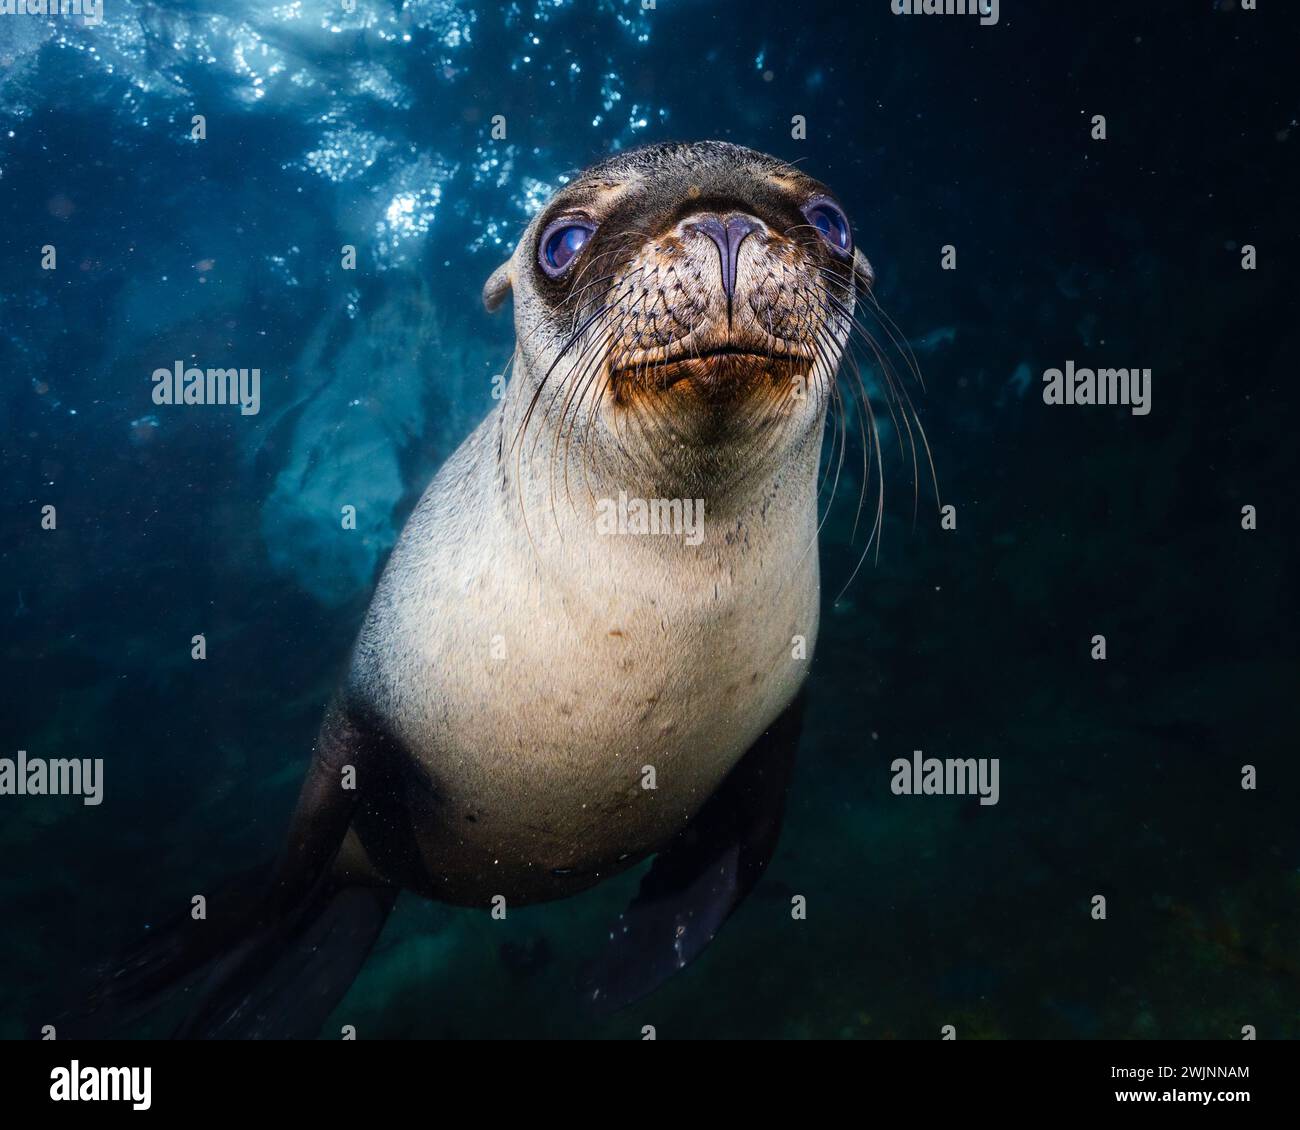 Underwater image of a majestic grey and white sea lion swimming near a sandy reef Stock Photo